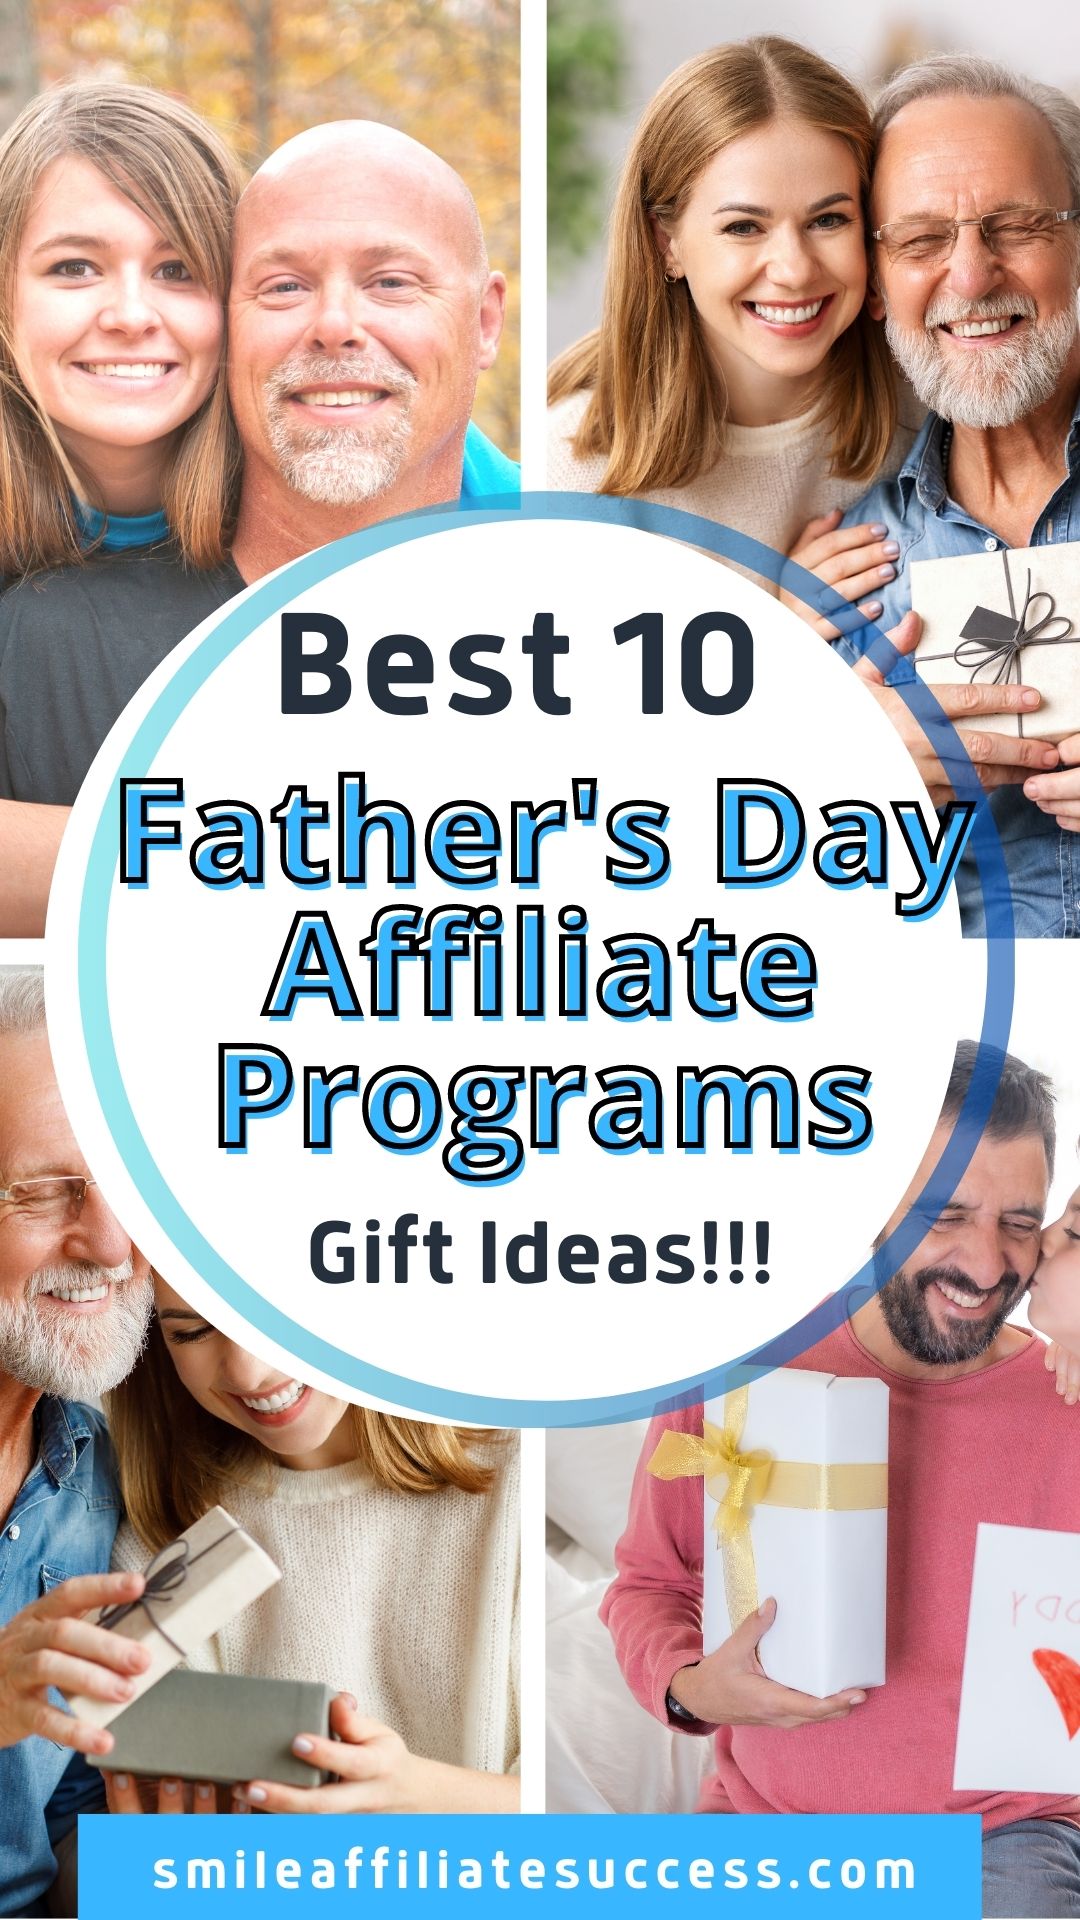 Best 10 Father’s Day Affiliate Programs